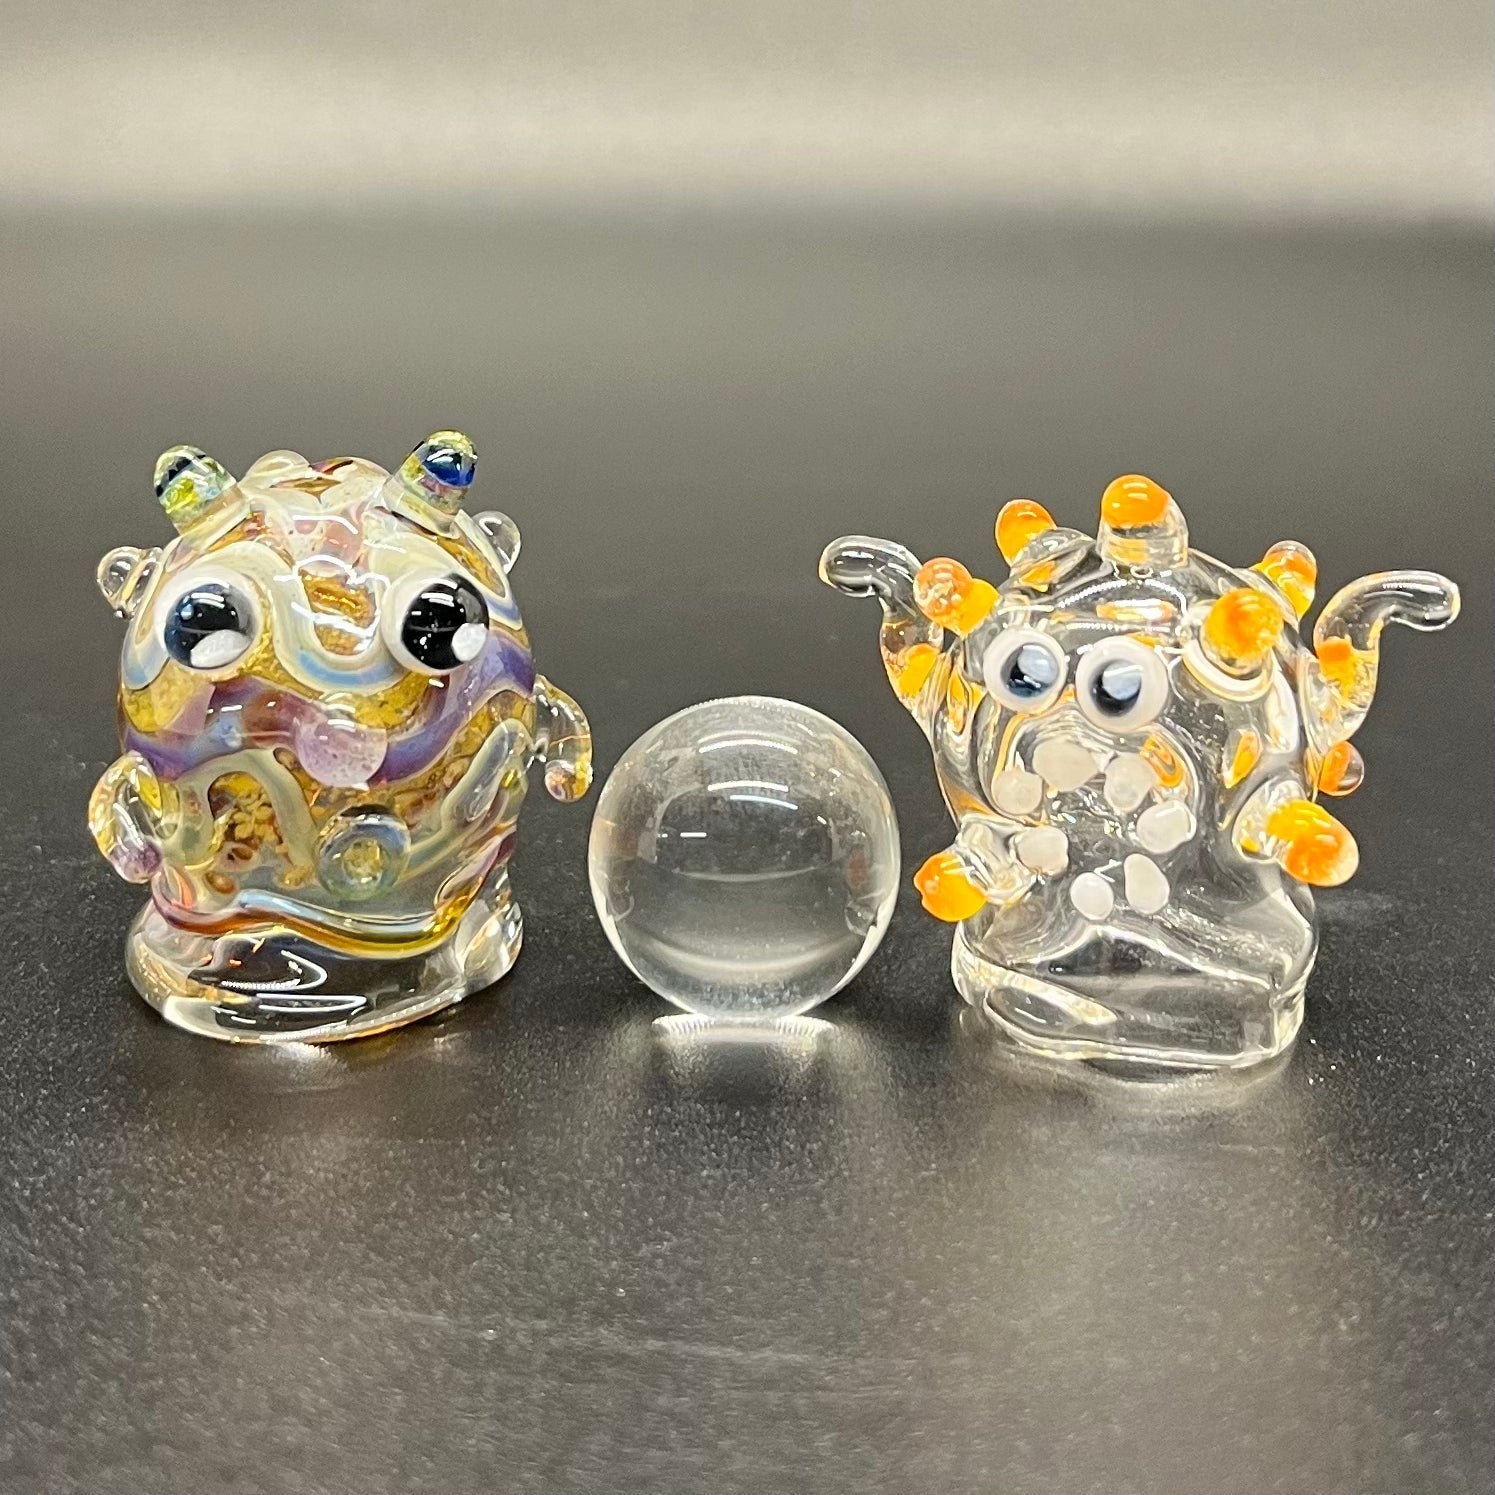 Intro to Blown Glass: Monsters! Thursday March 14th 6-9pm